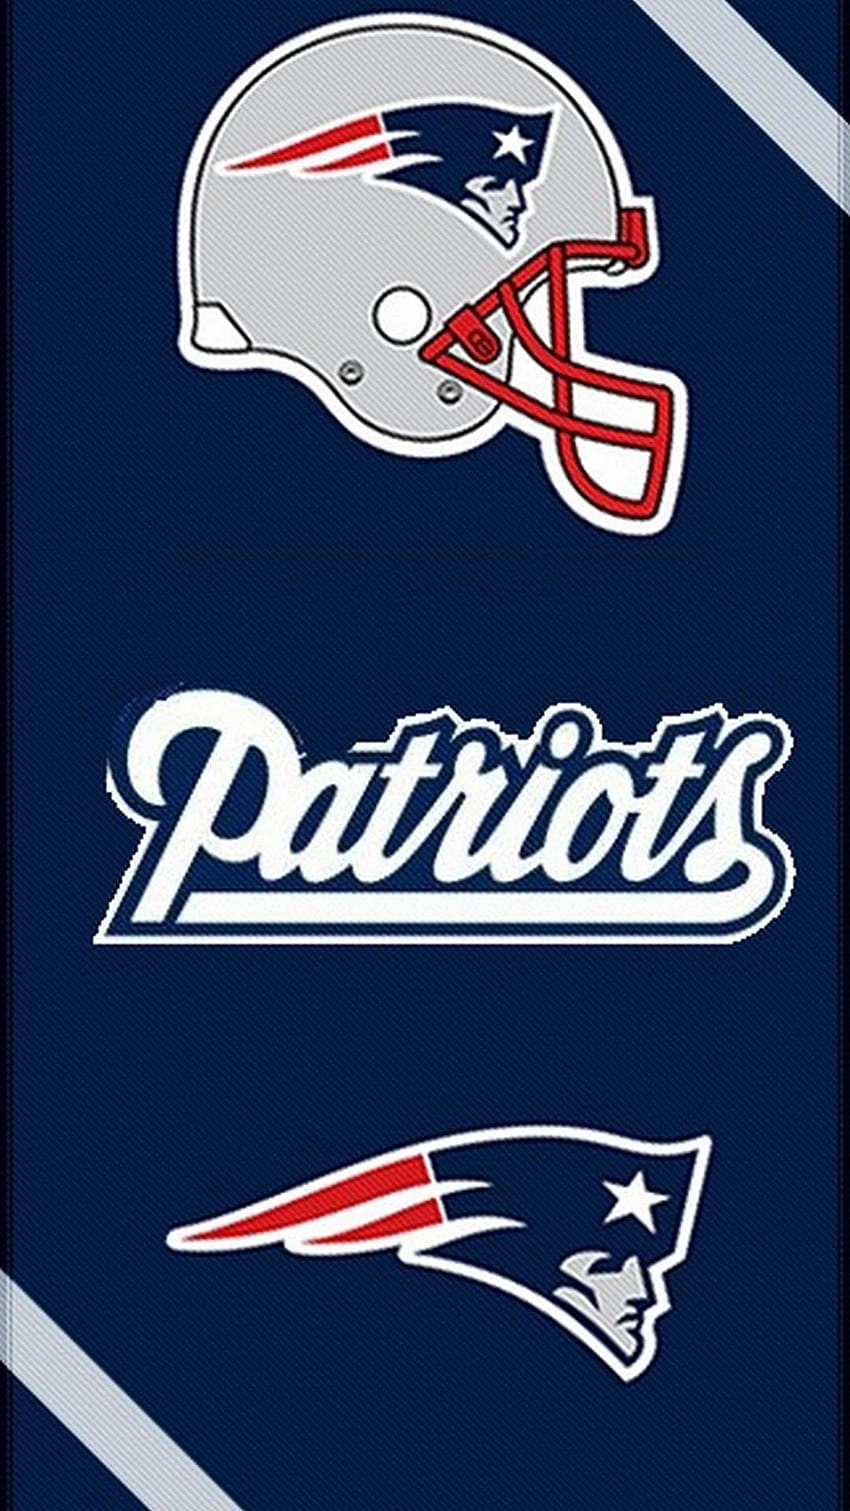 The Patriots Hall of Fame (@patriotshall) • Instagram photos and videos